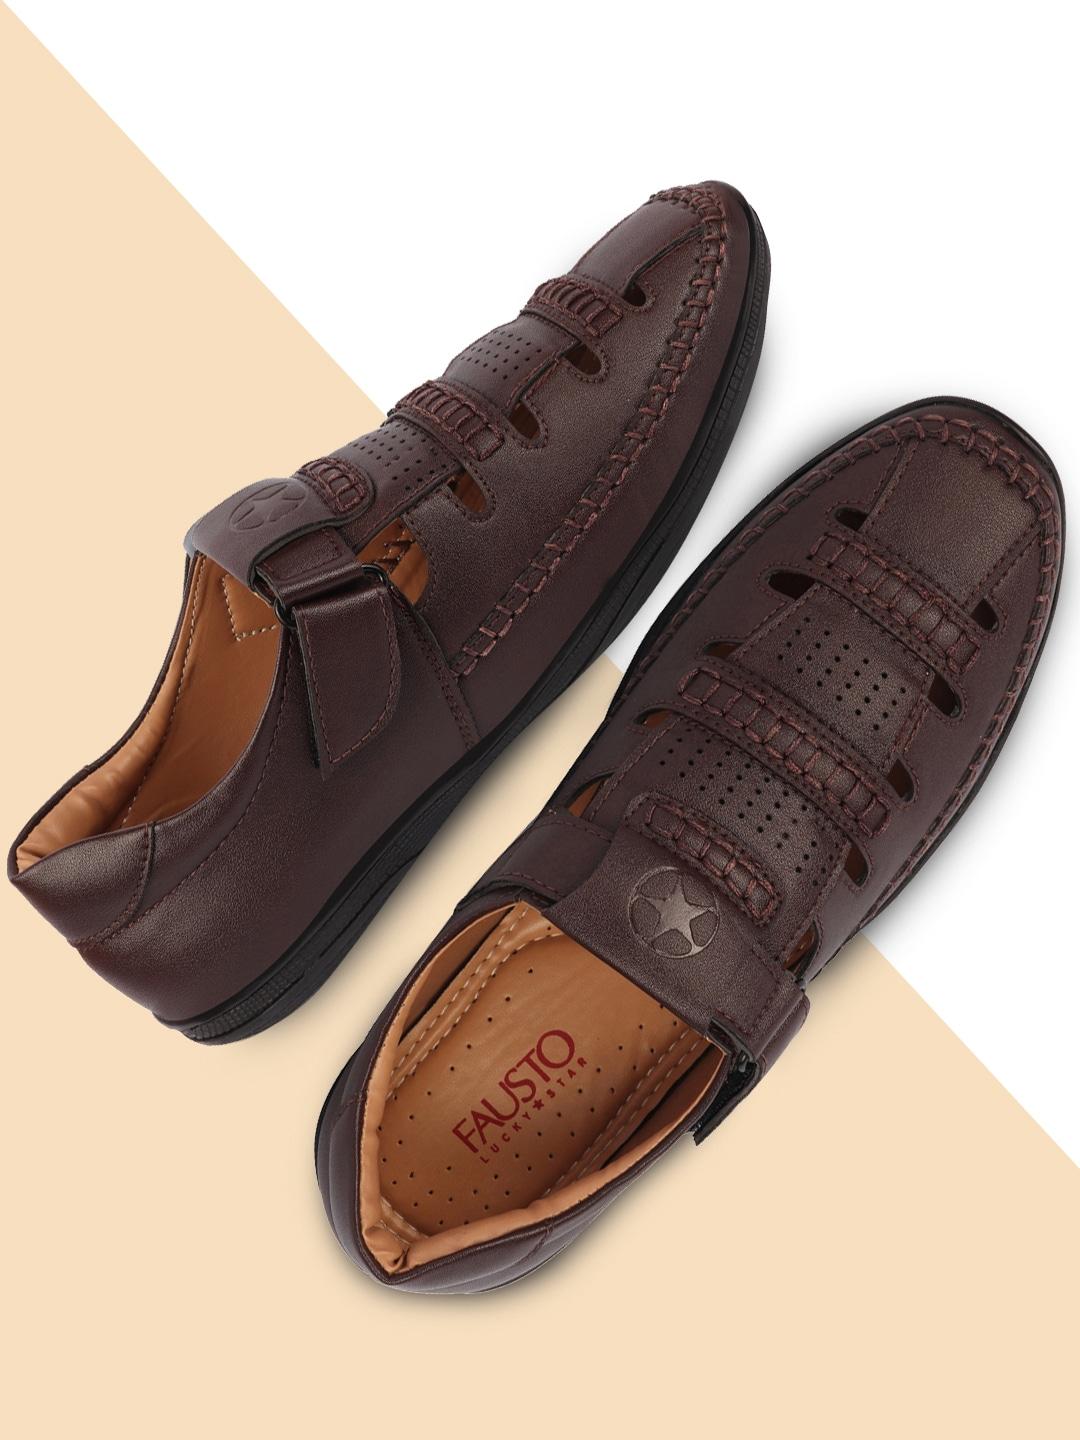 fausto-men-brown-stitched-design-shoe-style-sandals